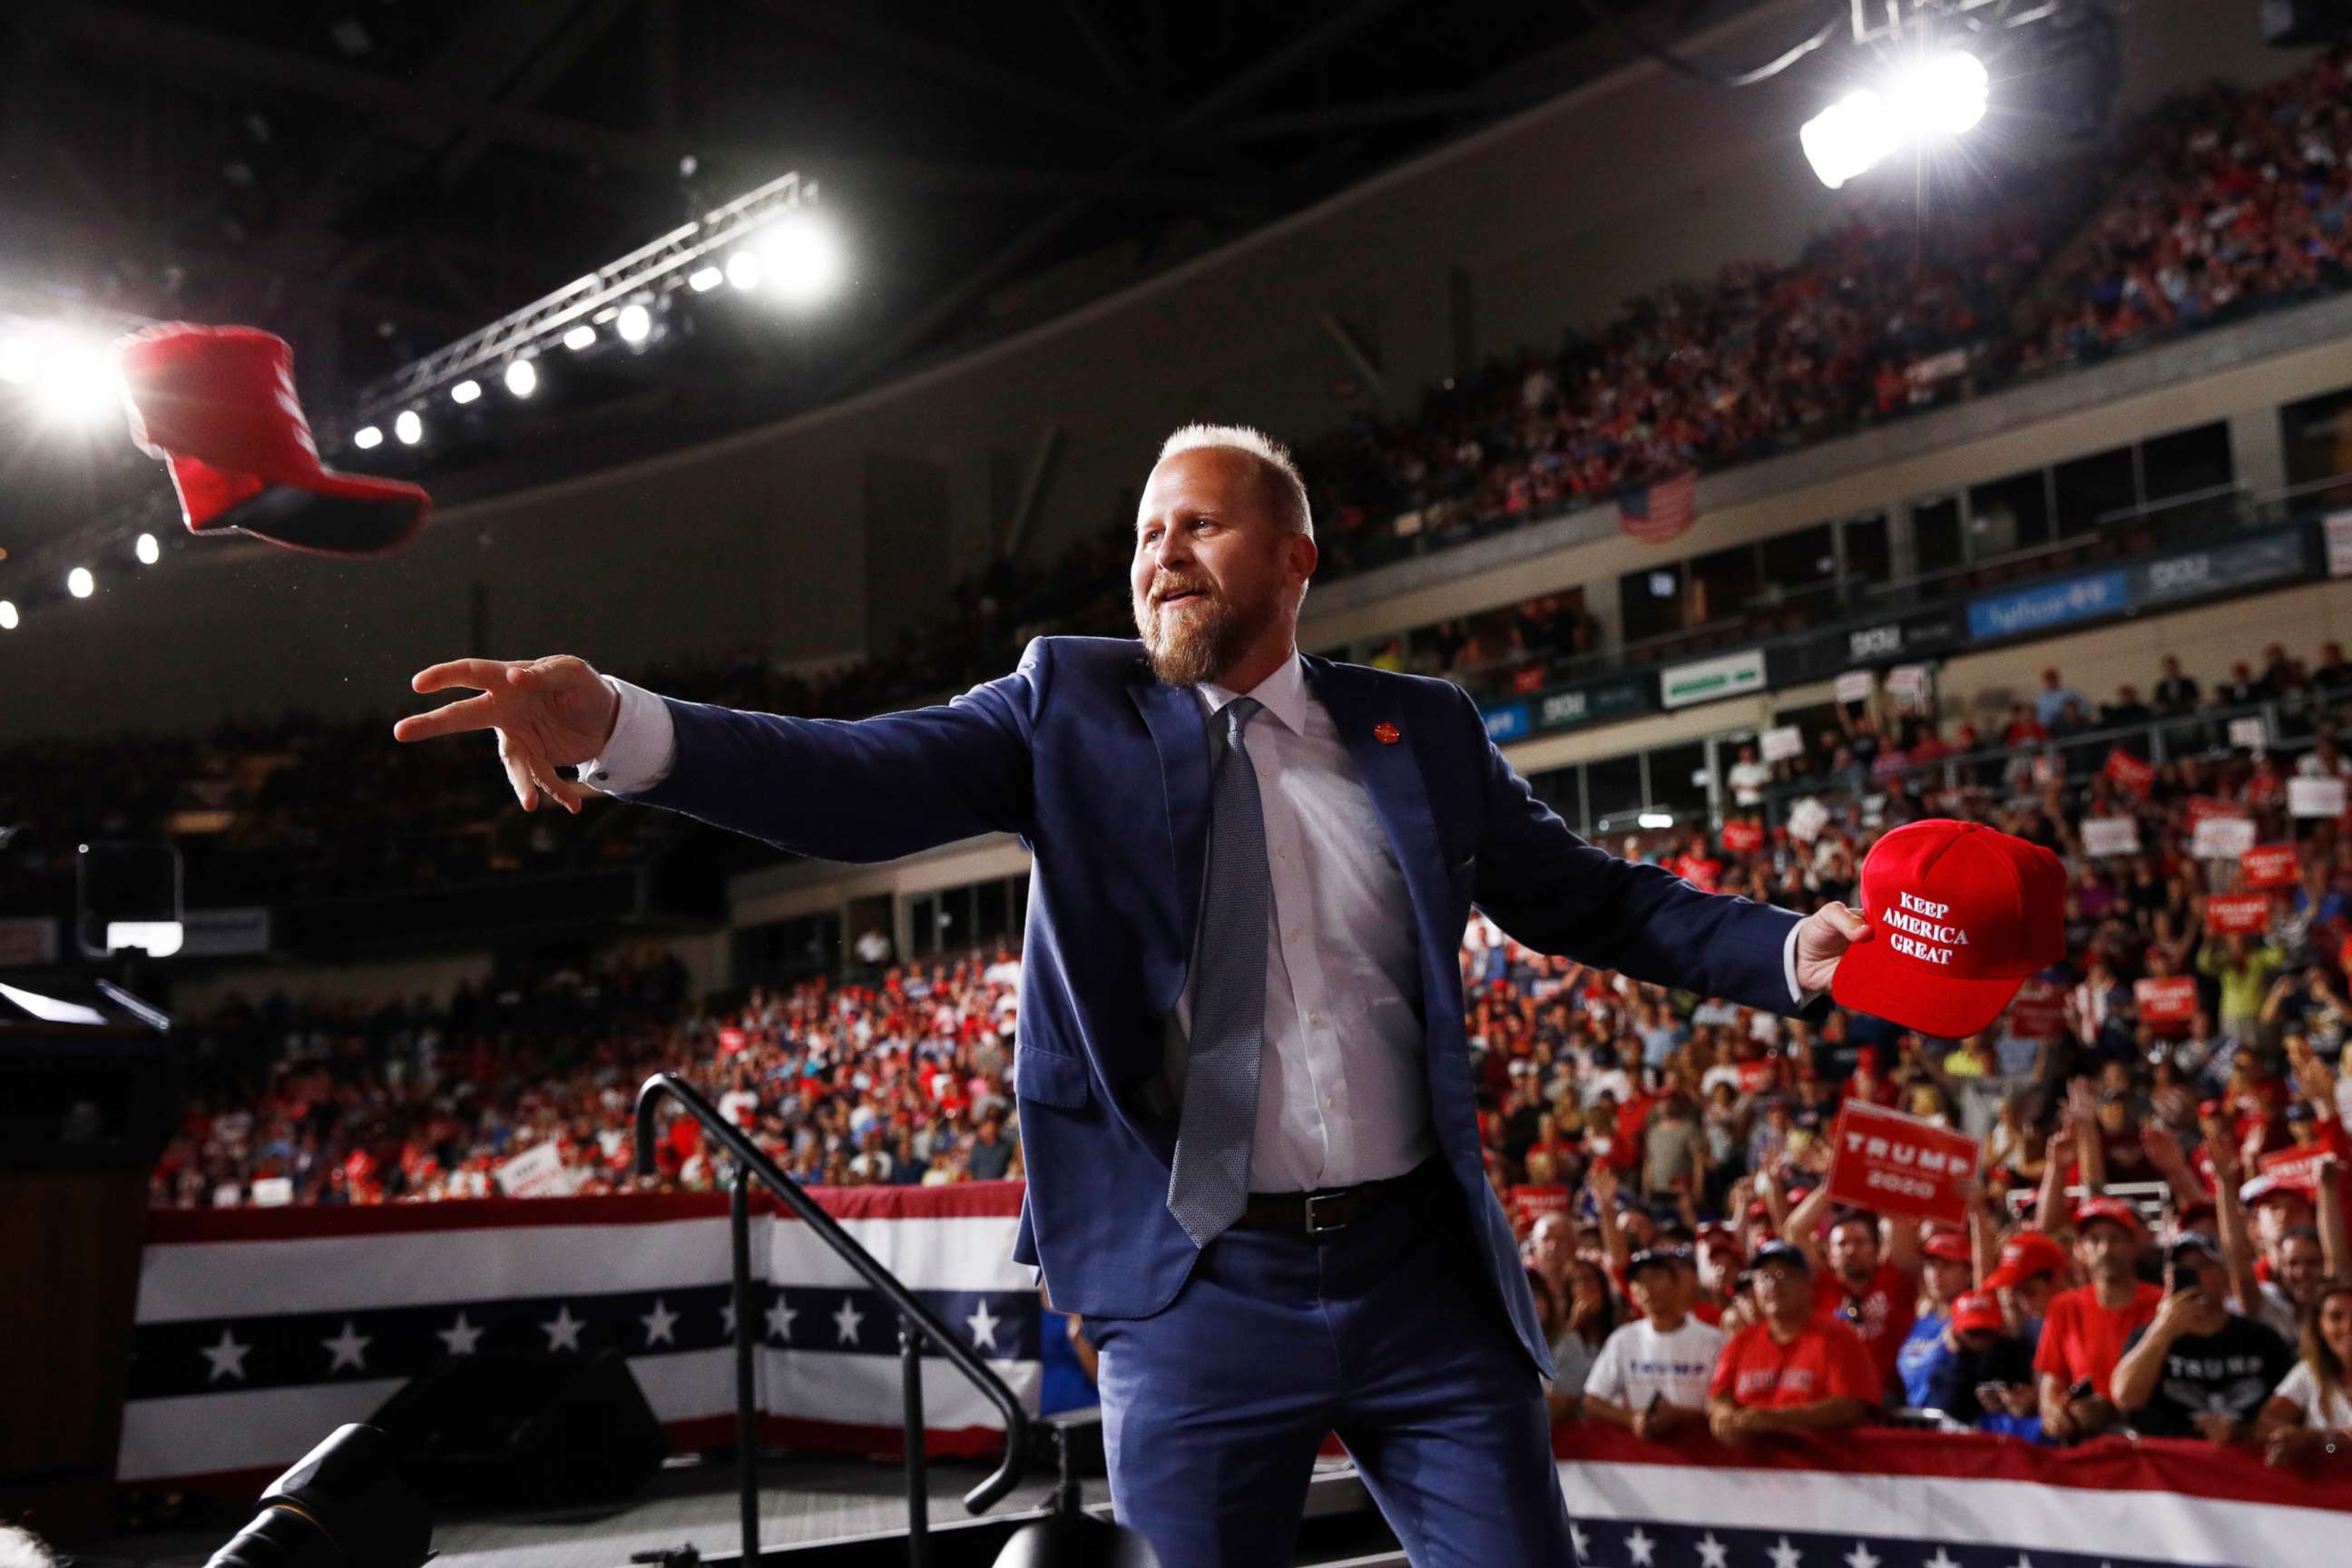 PHOTO: President Donald Trump's Campaign Manager Brad Parscale, tosses out hats to supporters before President Donald Trump speaks at a campaign rally, Thursday, Aug. 15, 2019, in Manchester, N.H.